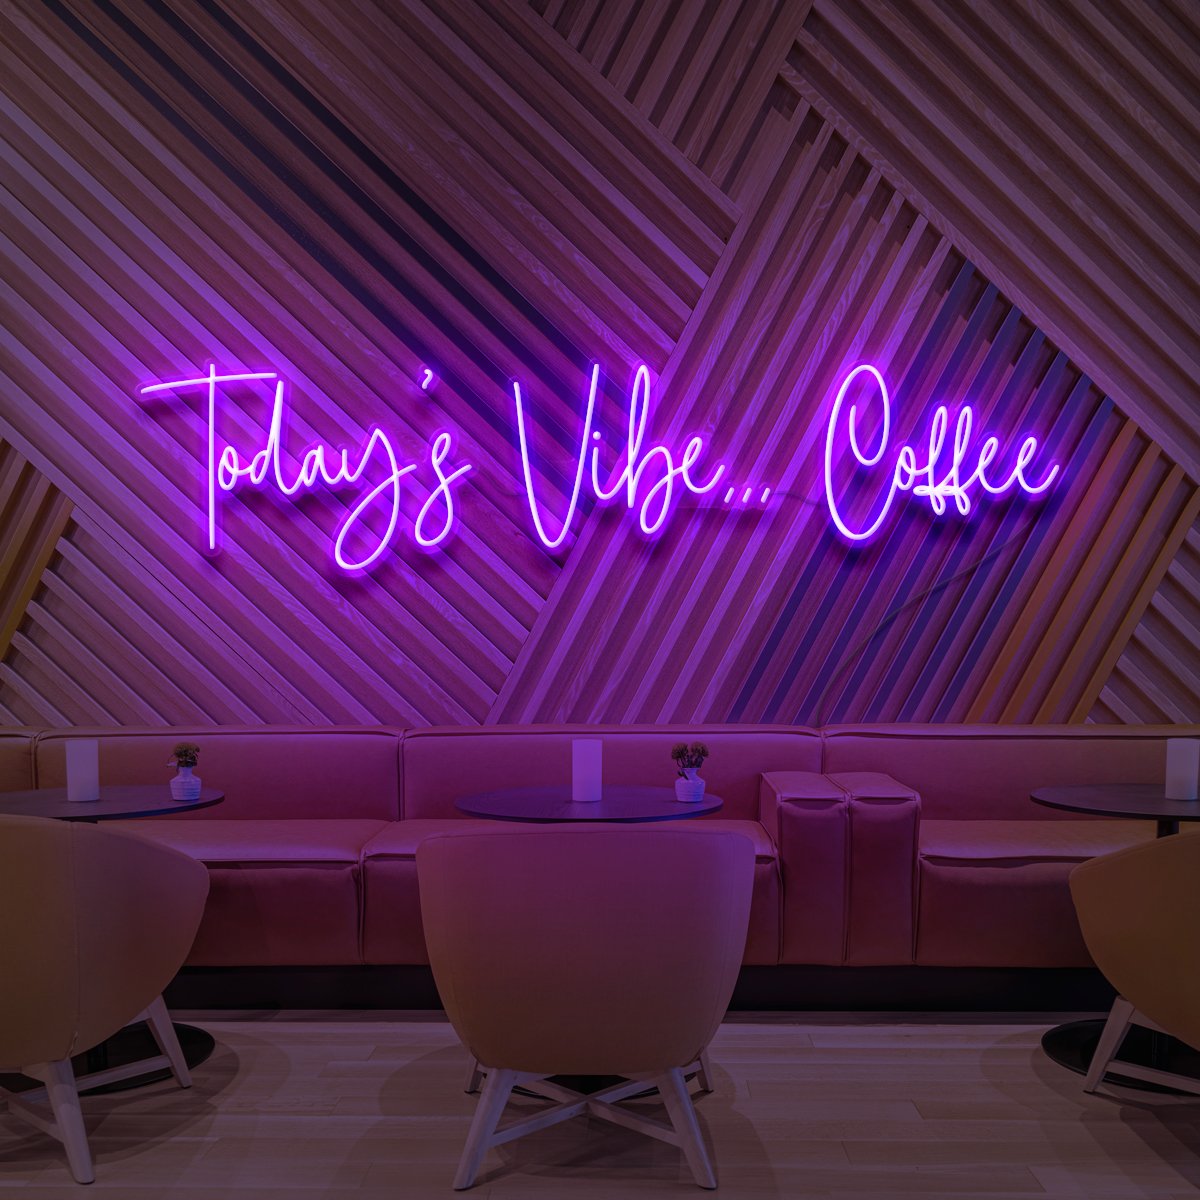 "Today's Vibe... Coffee" Neon Sign for Cafés 90cm (3ft) / Purple / LED Neon by Neon Icons